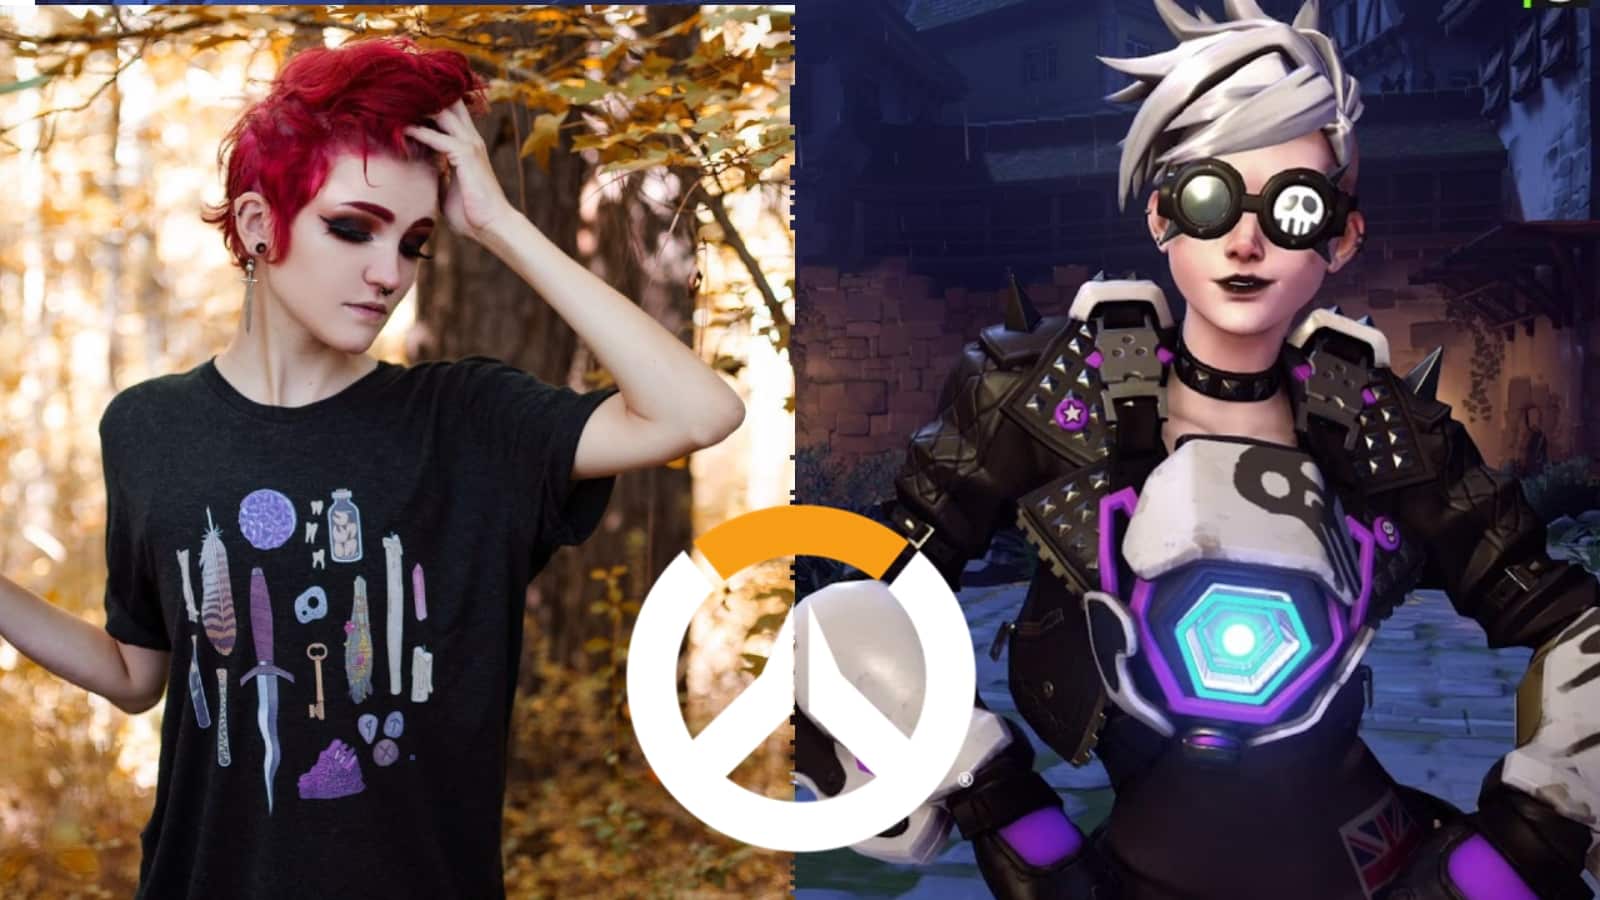 Overwatch Tracer cosplay feature image